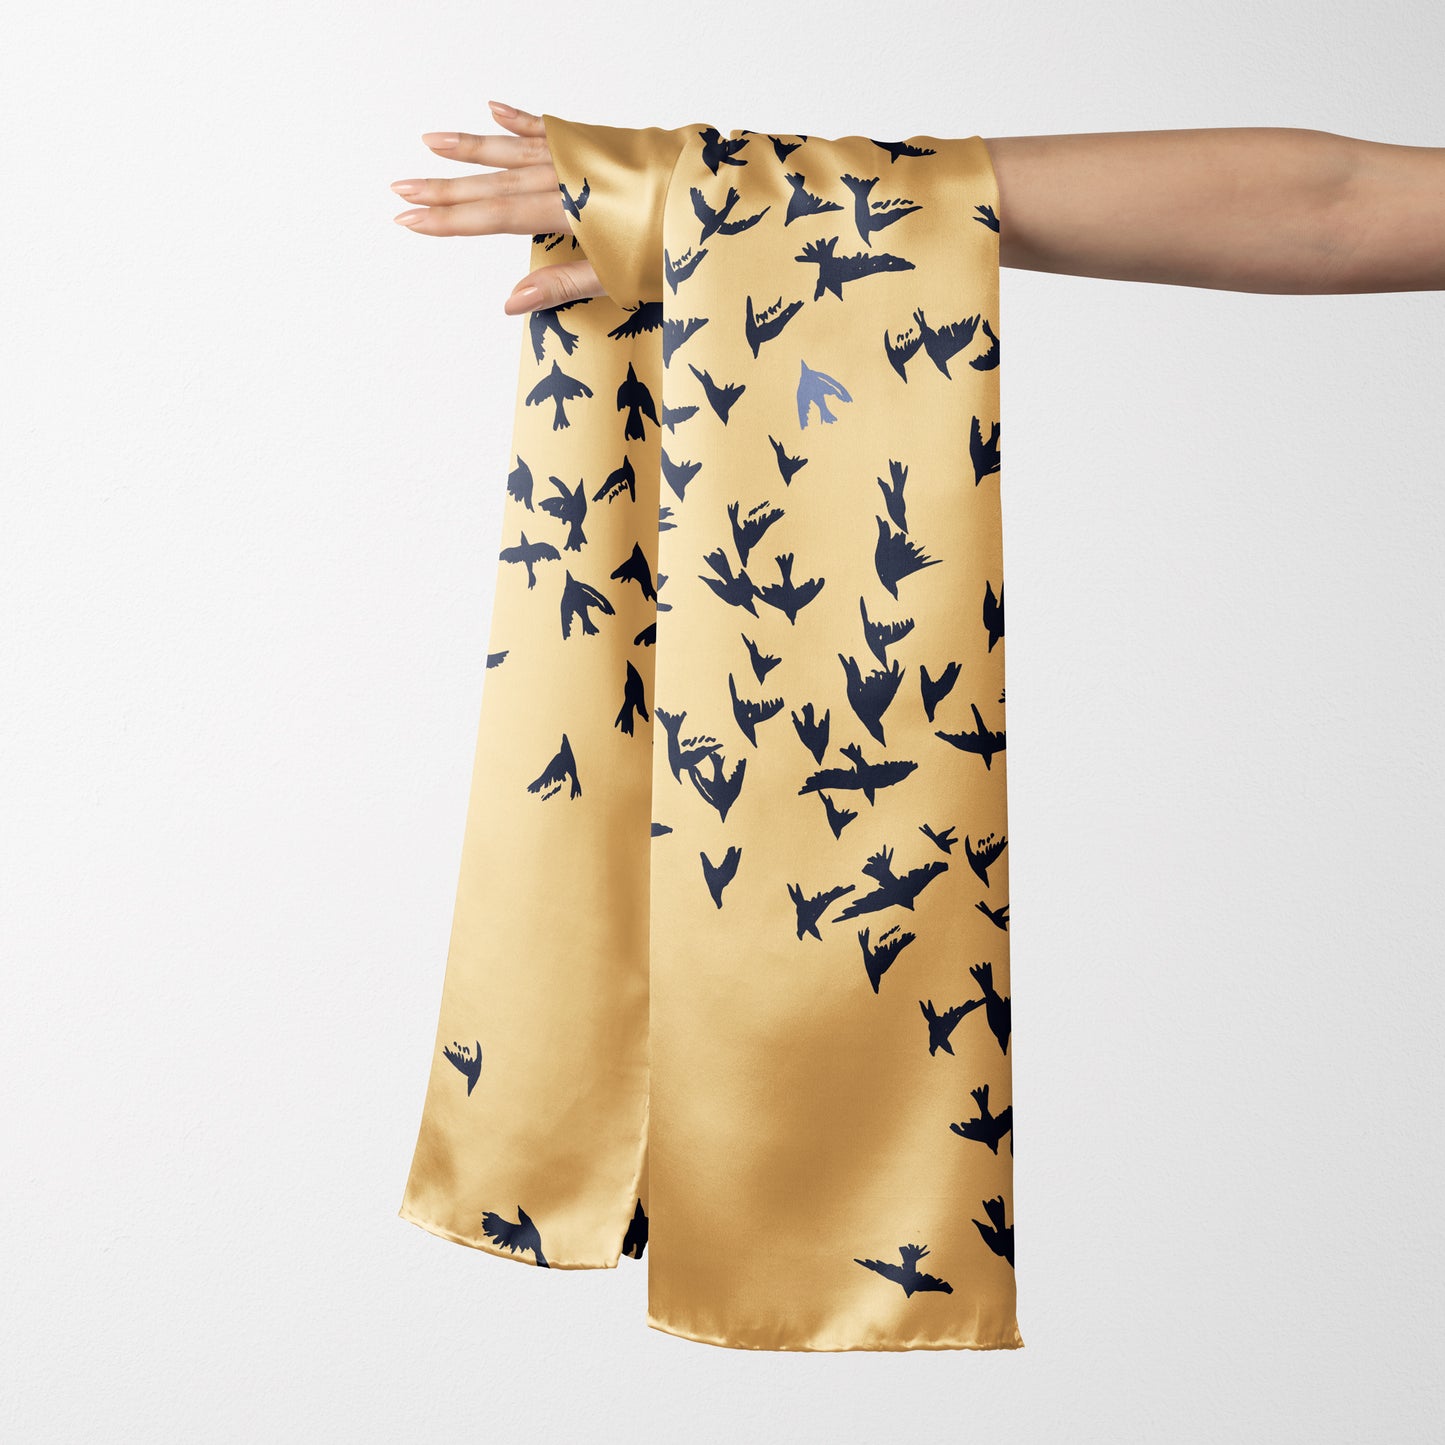 Charmeuse Long Scarf in "Fly Free" Bird Flock Migration